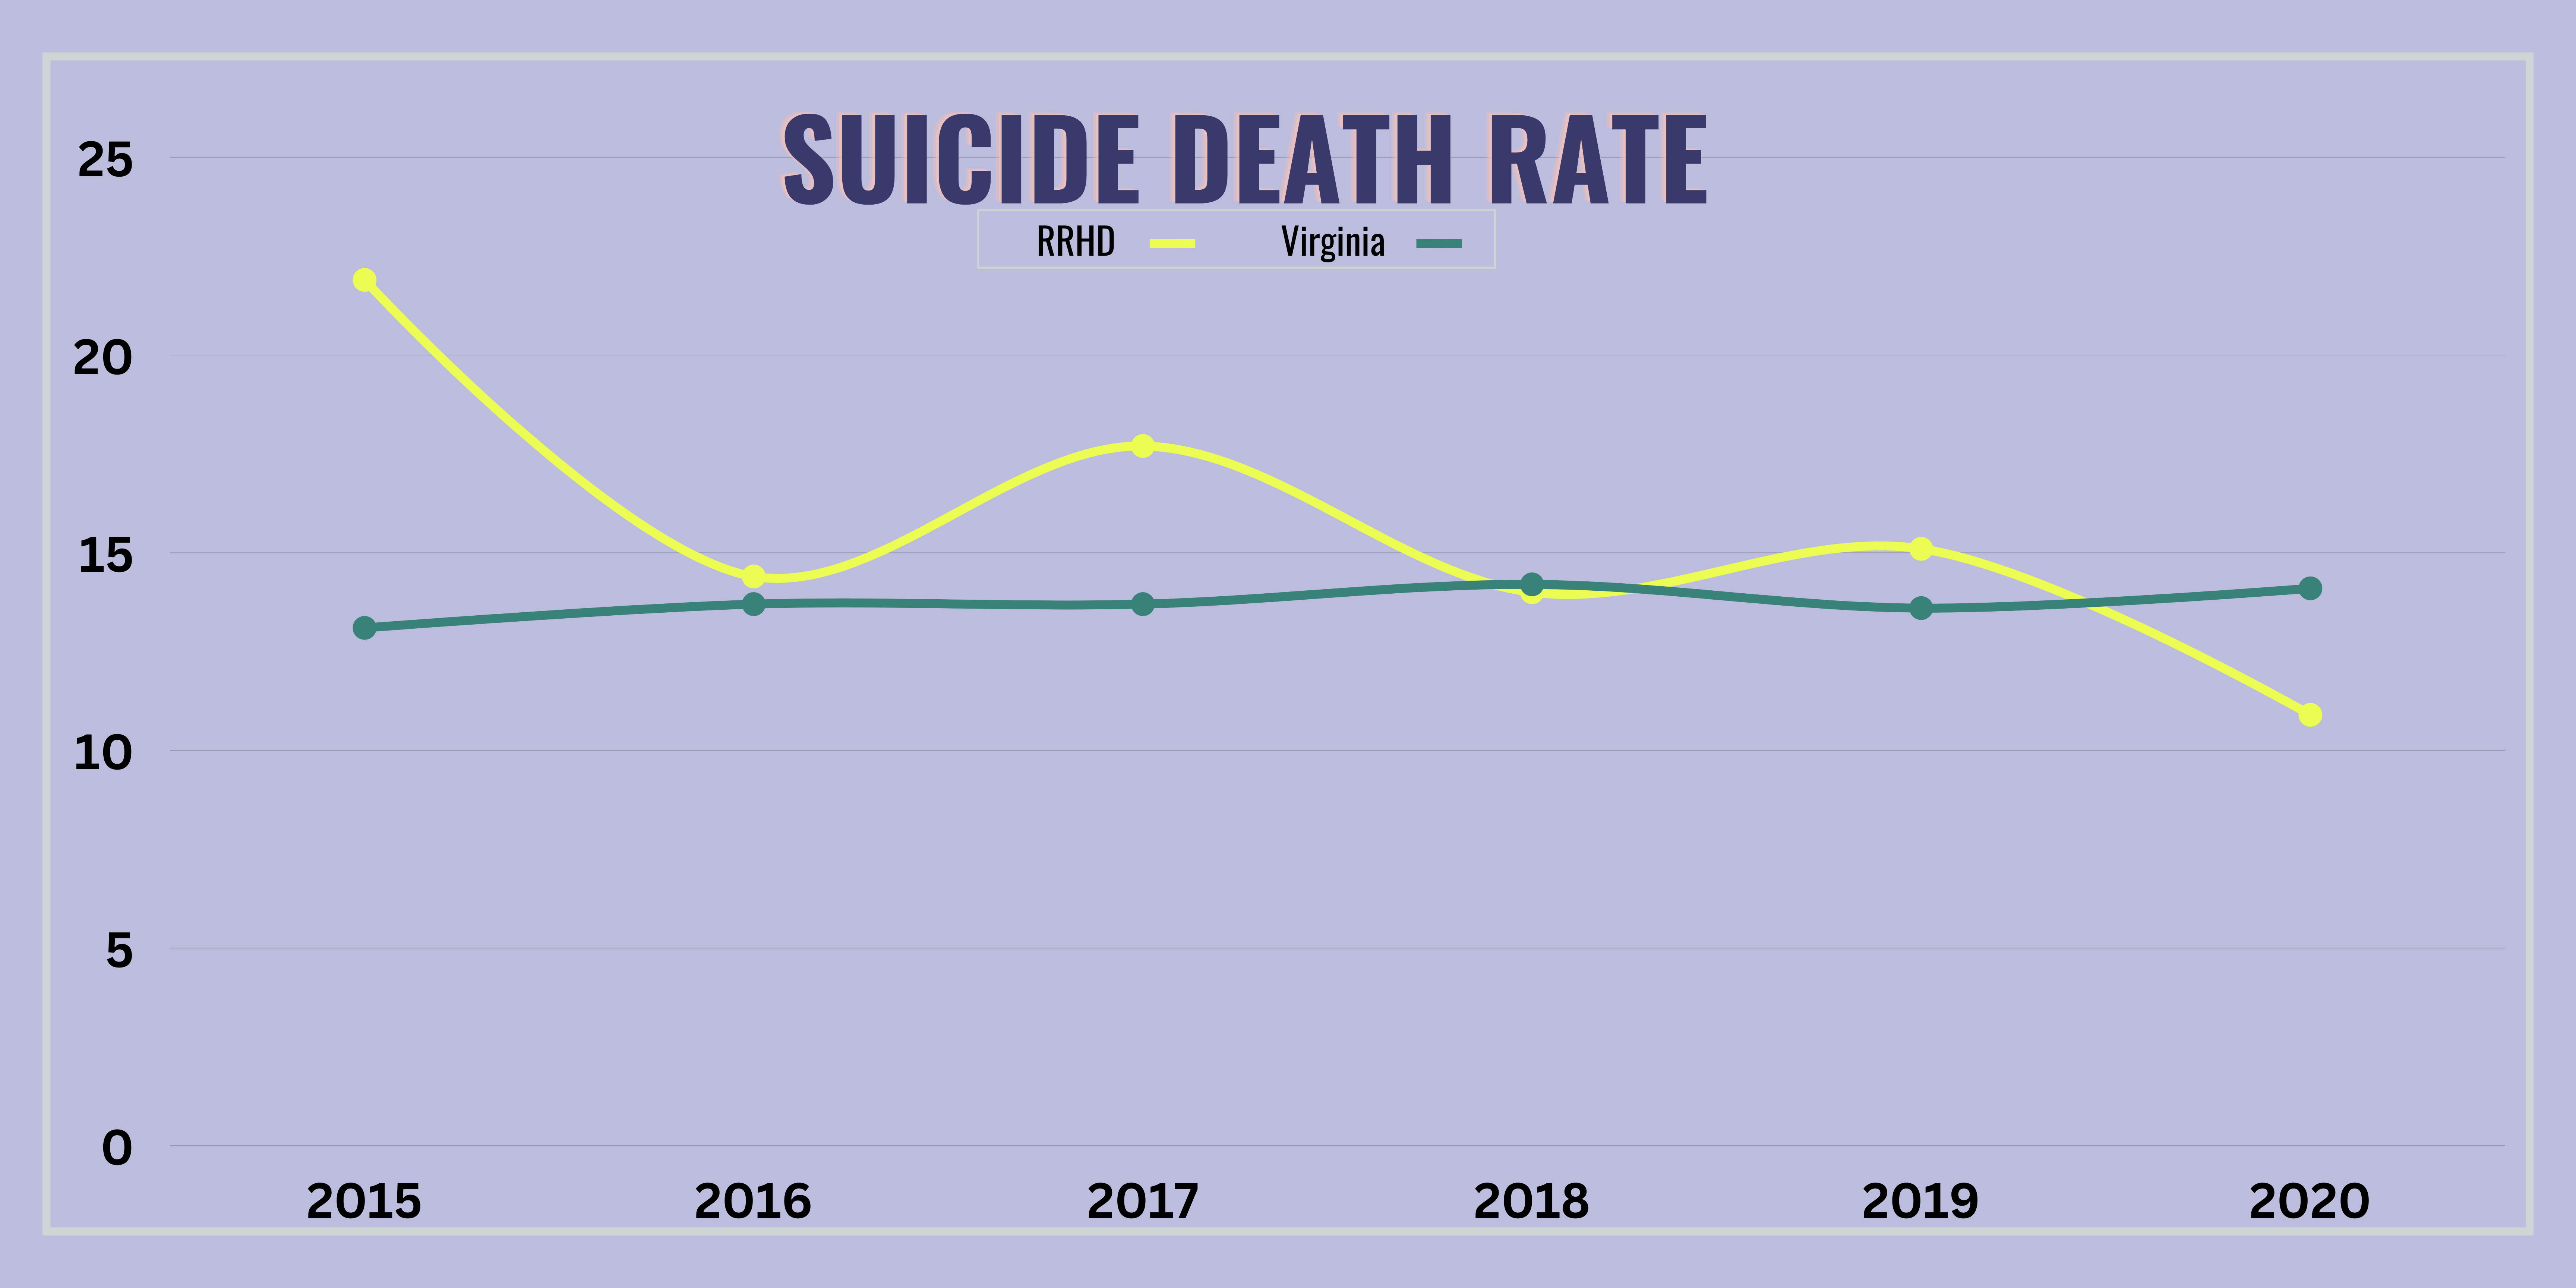 Suicide Death Rate Graph 
RRHD has overall been declining but with fluctuations throughout the years. Virginia has remained steady. 